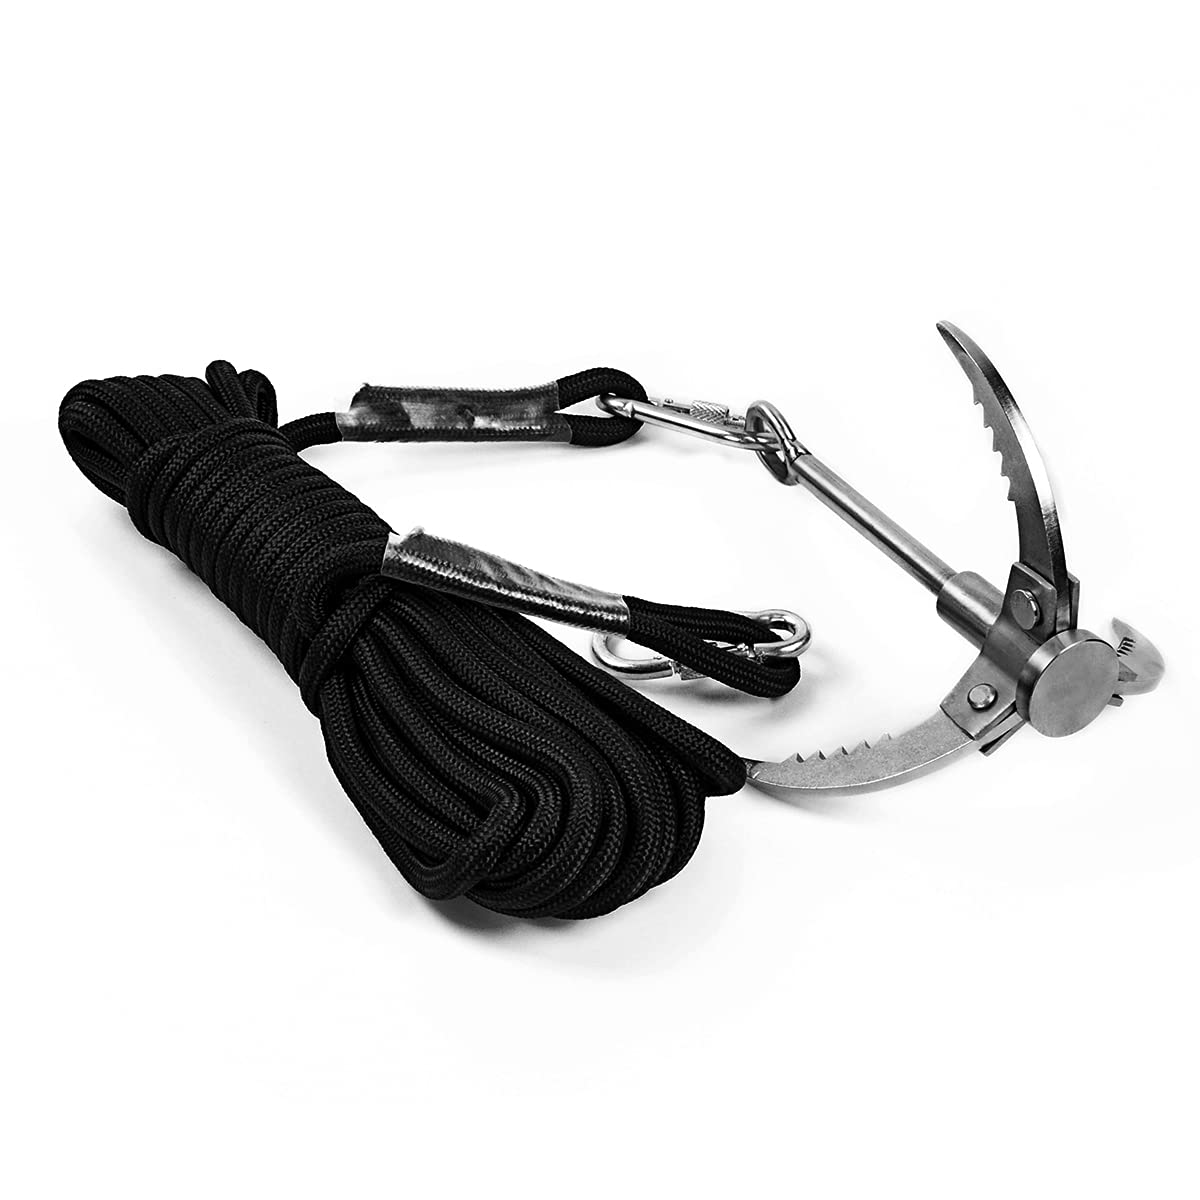 Stainless Steel Folding Grappling Hook, Gravity Grappling Hook,  Multifunctional Heavy Duty Grapple Hook with 4 Enhanced Grip Claws for  Hiking 